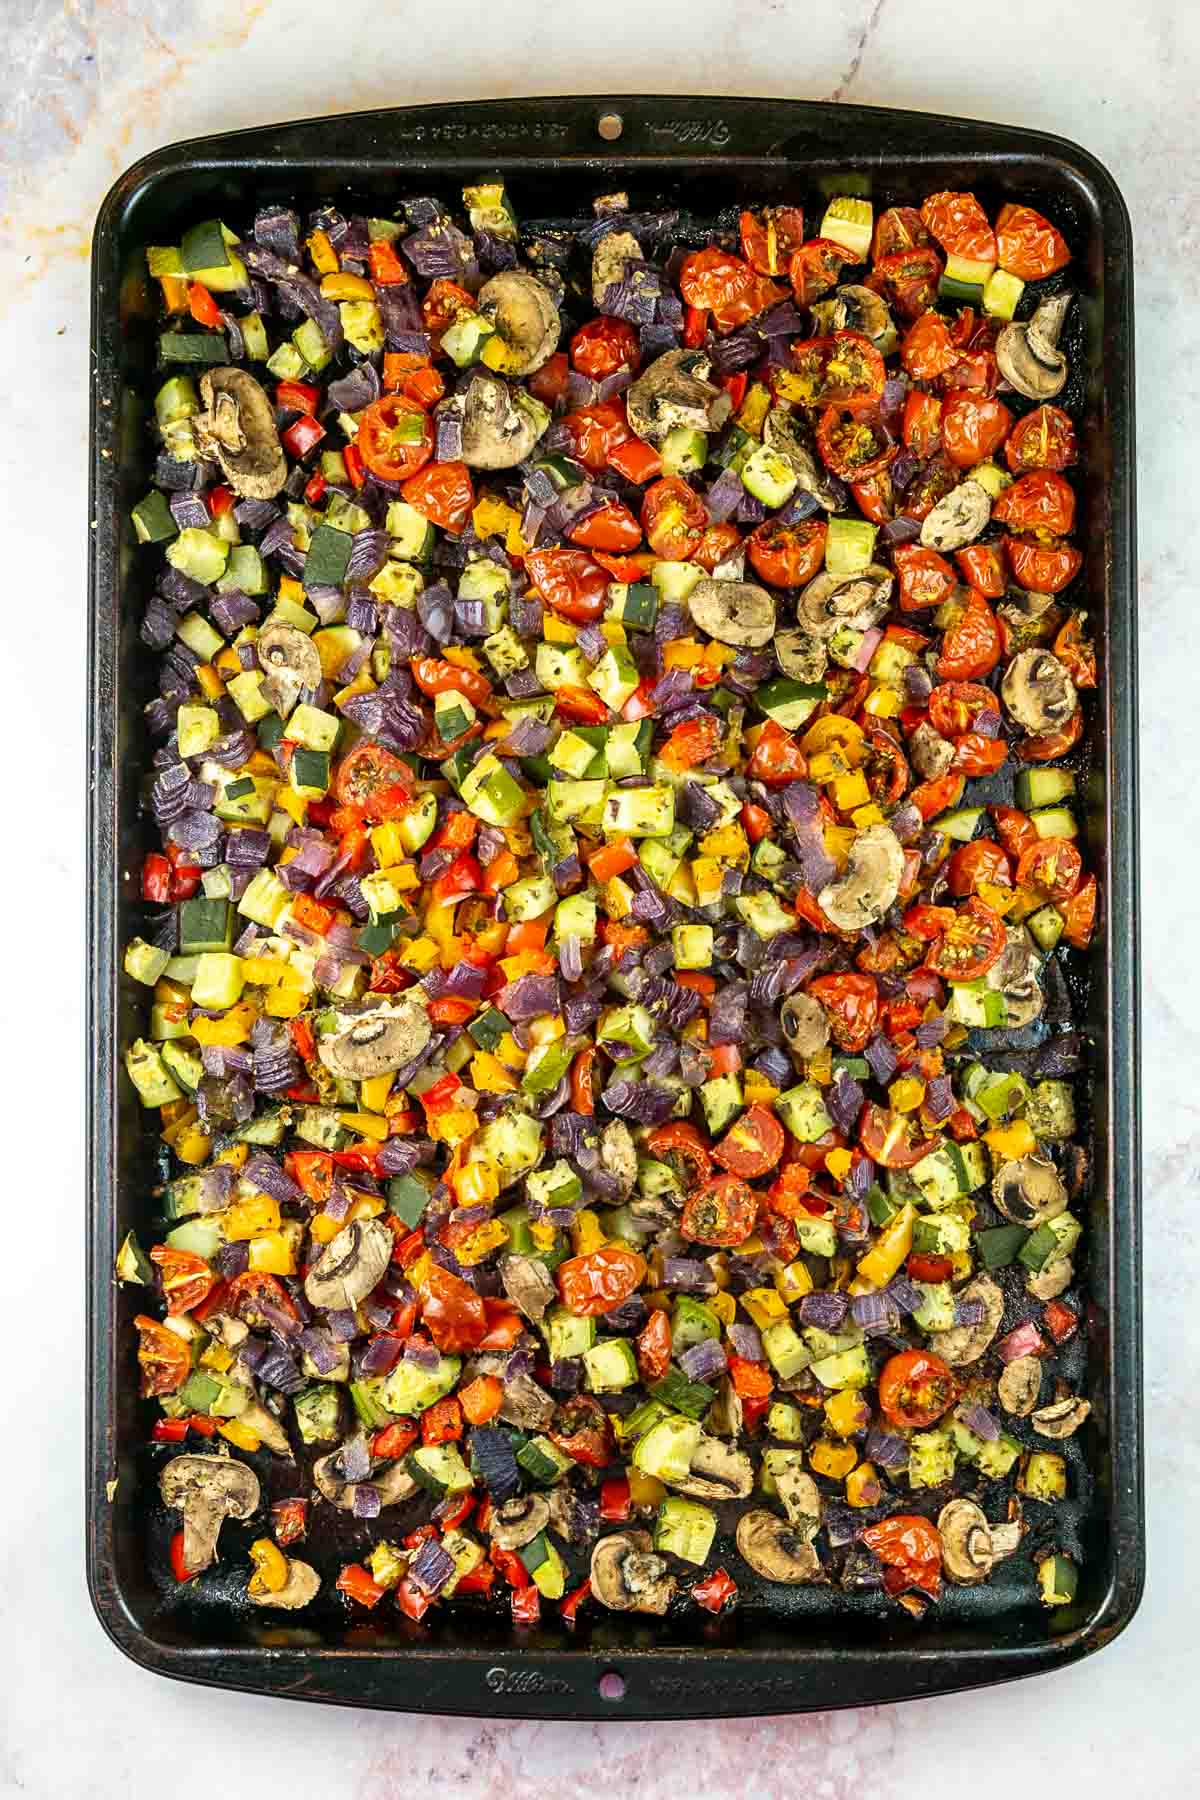 Top view of baking sheet with roasted veggies. 